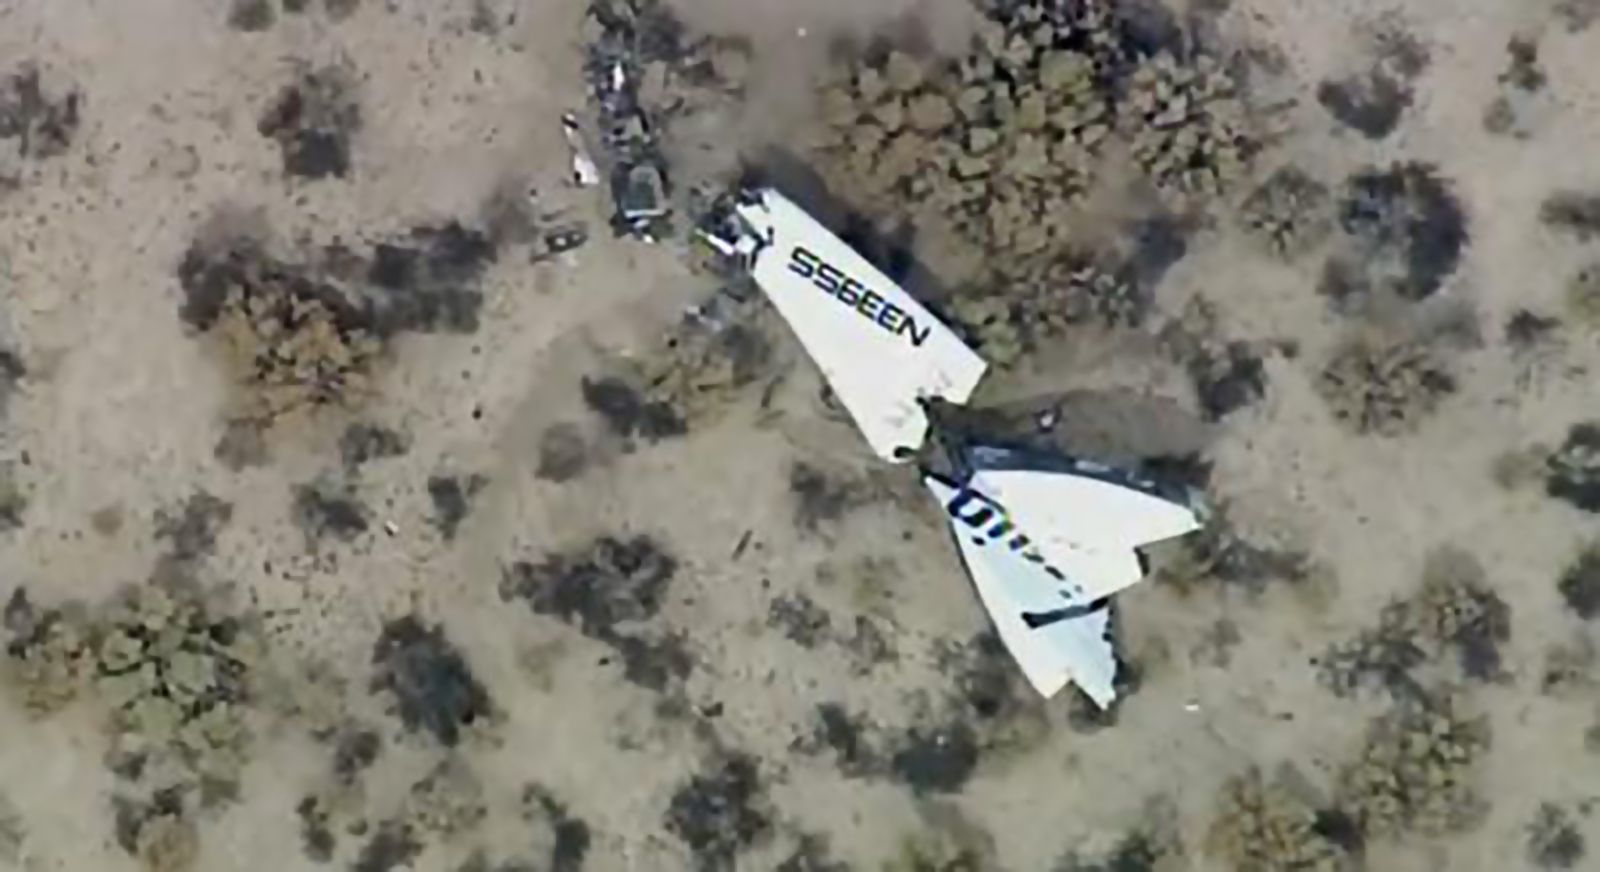 virgin galactic spaceshiptwo crashes in desert during test at least one dead image 2